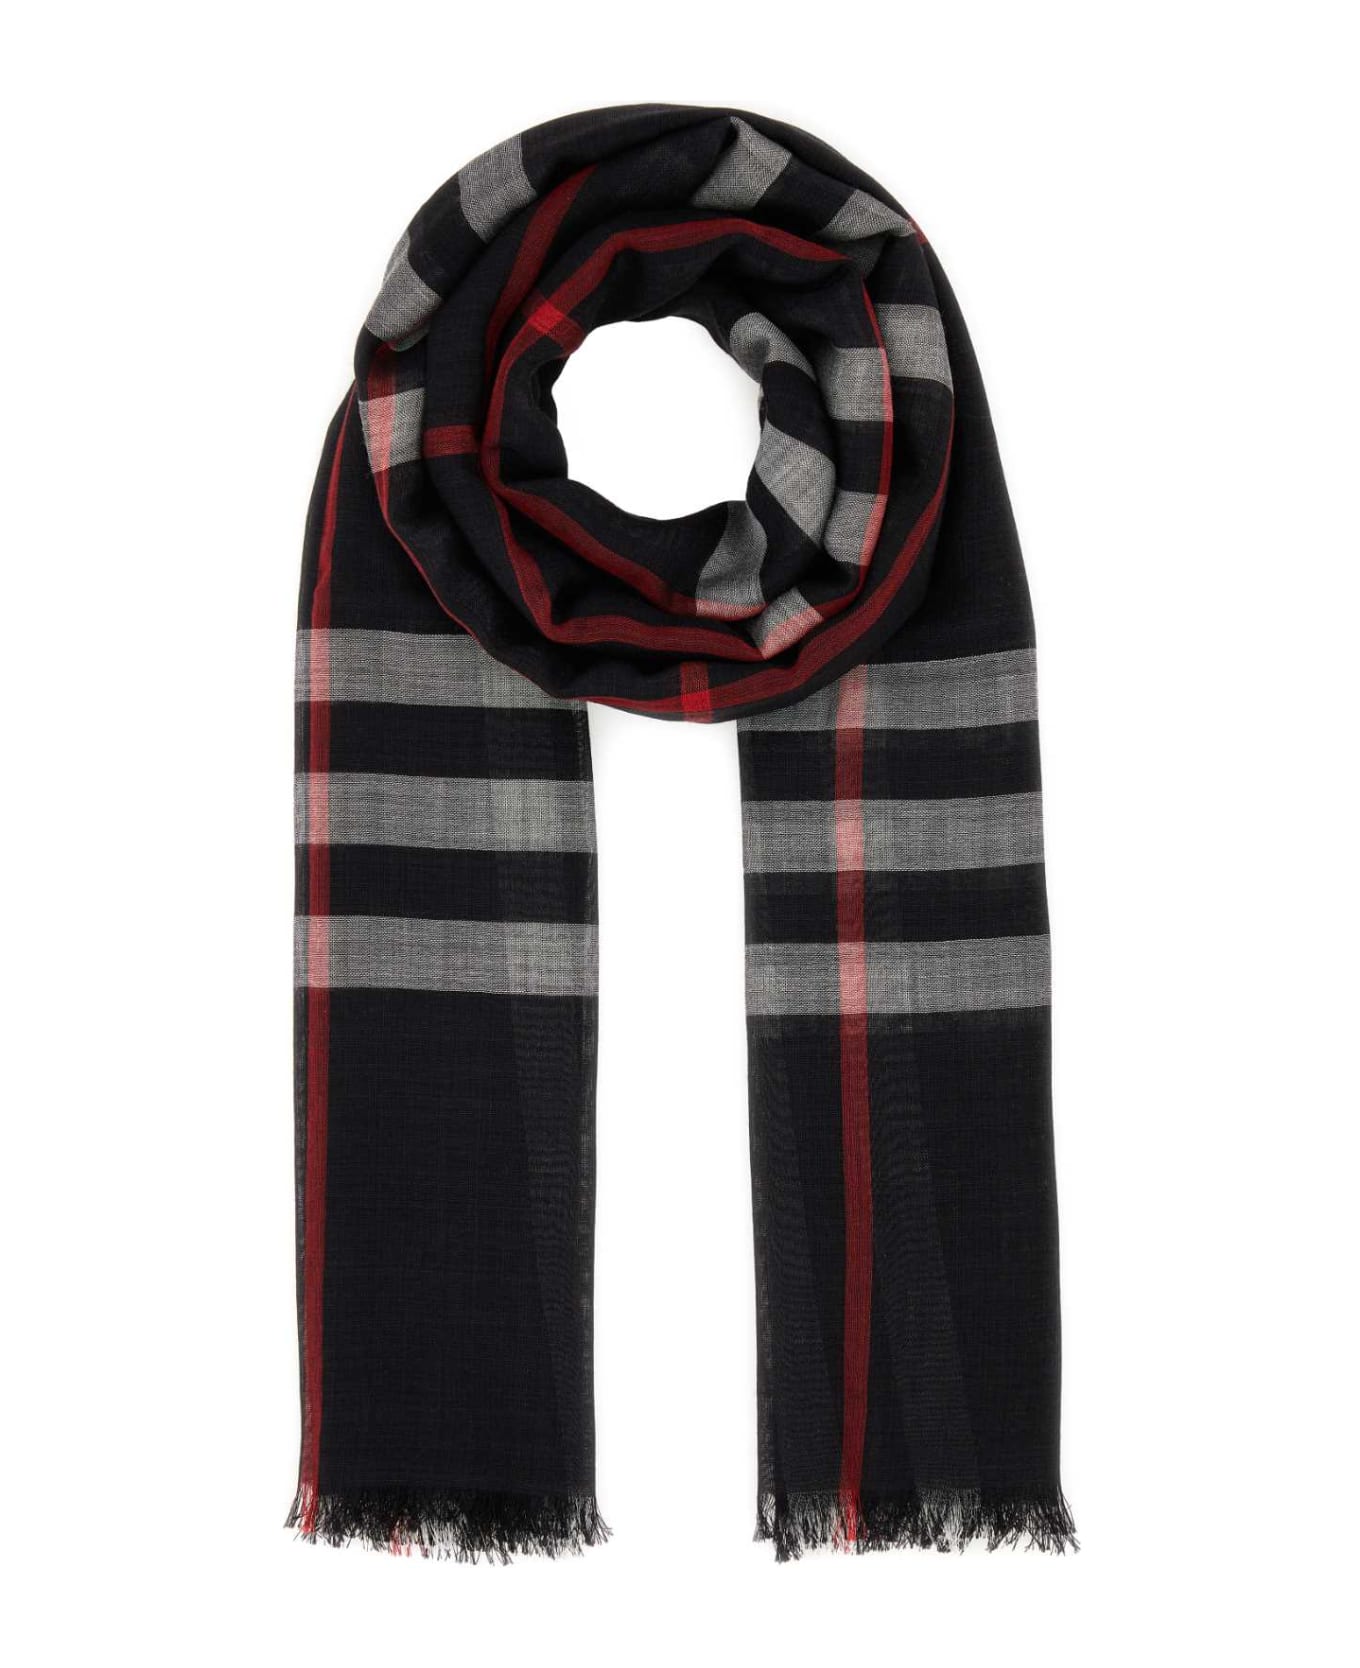 Burberry Embroidered Wool Blend Scarf - NAVY スカーフ